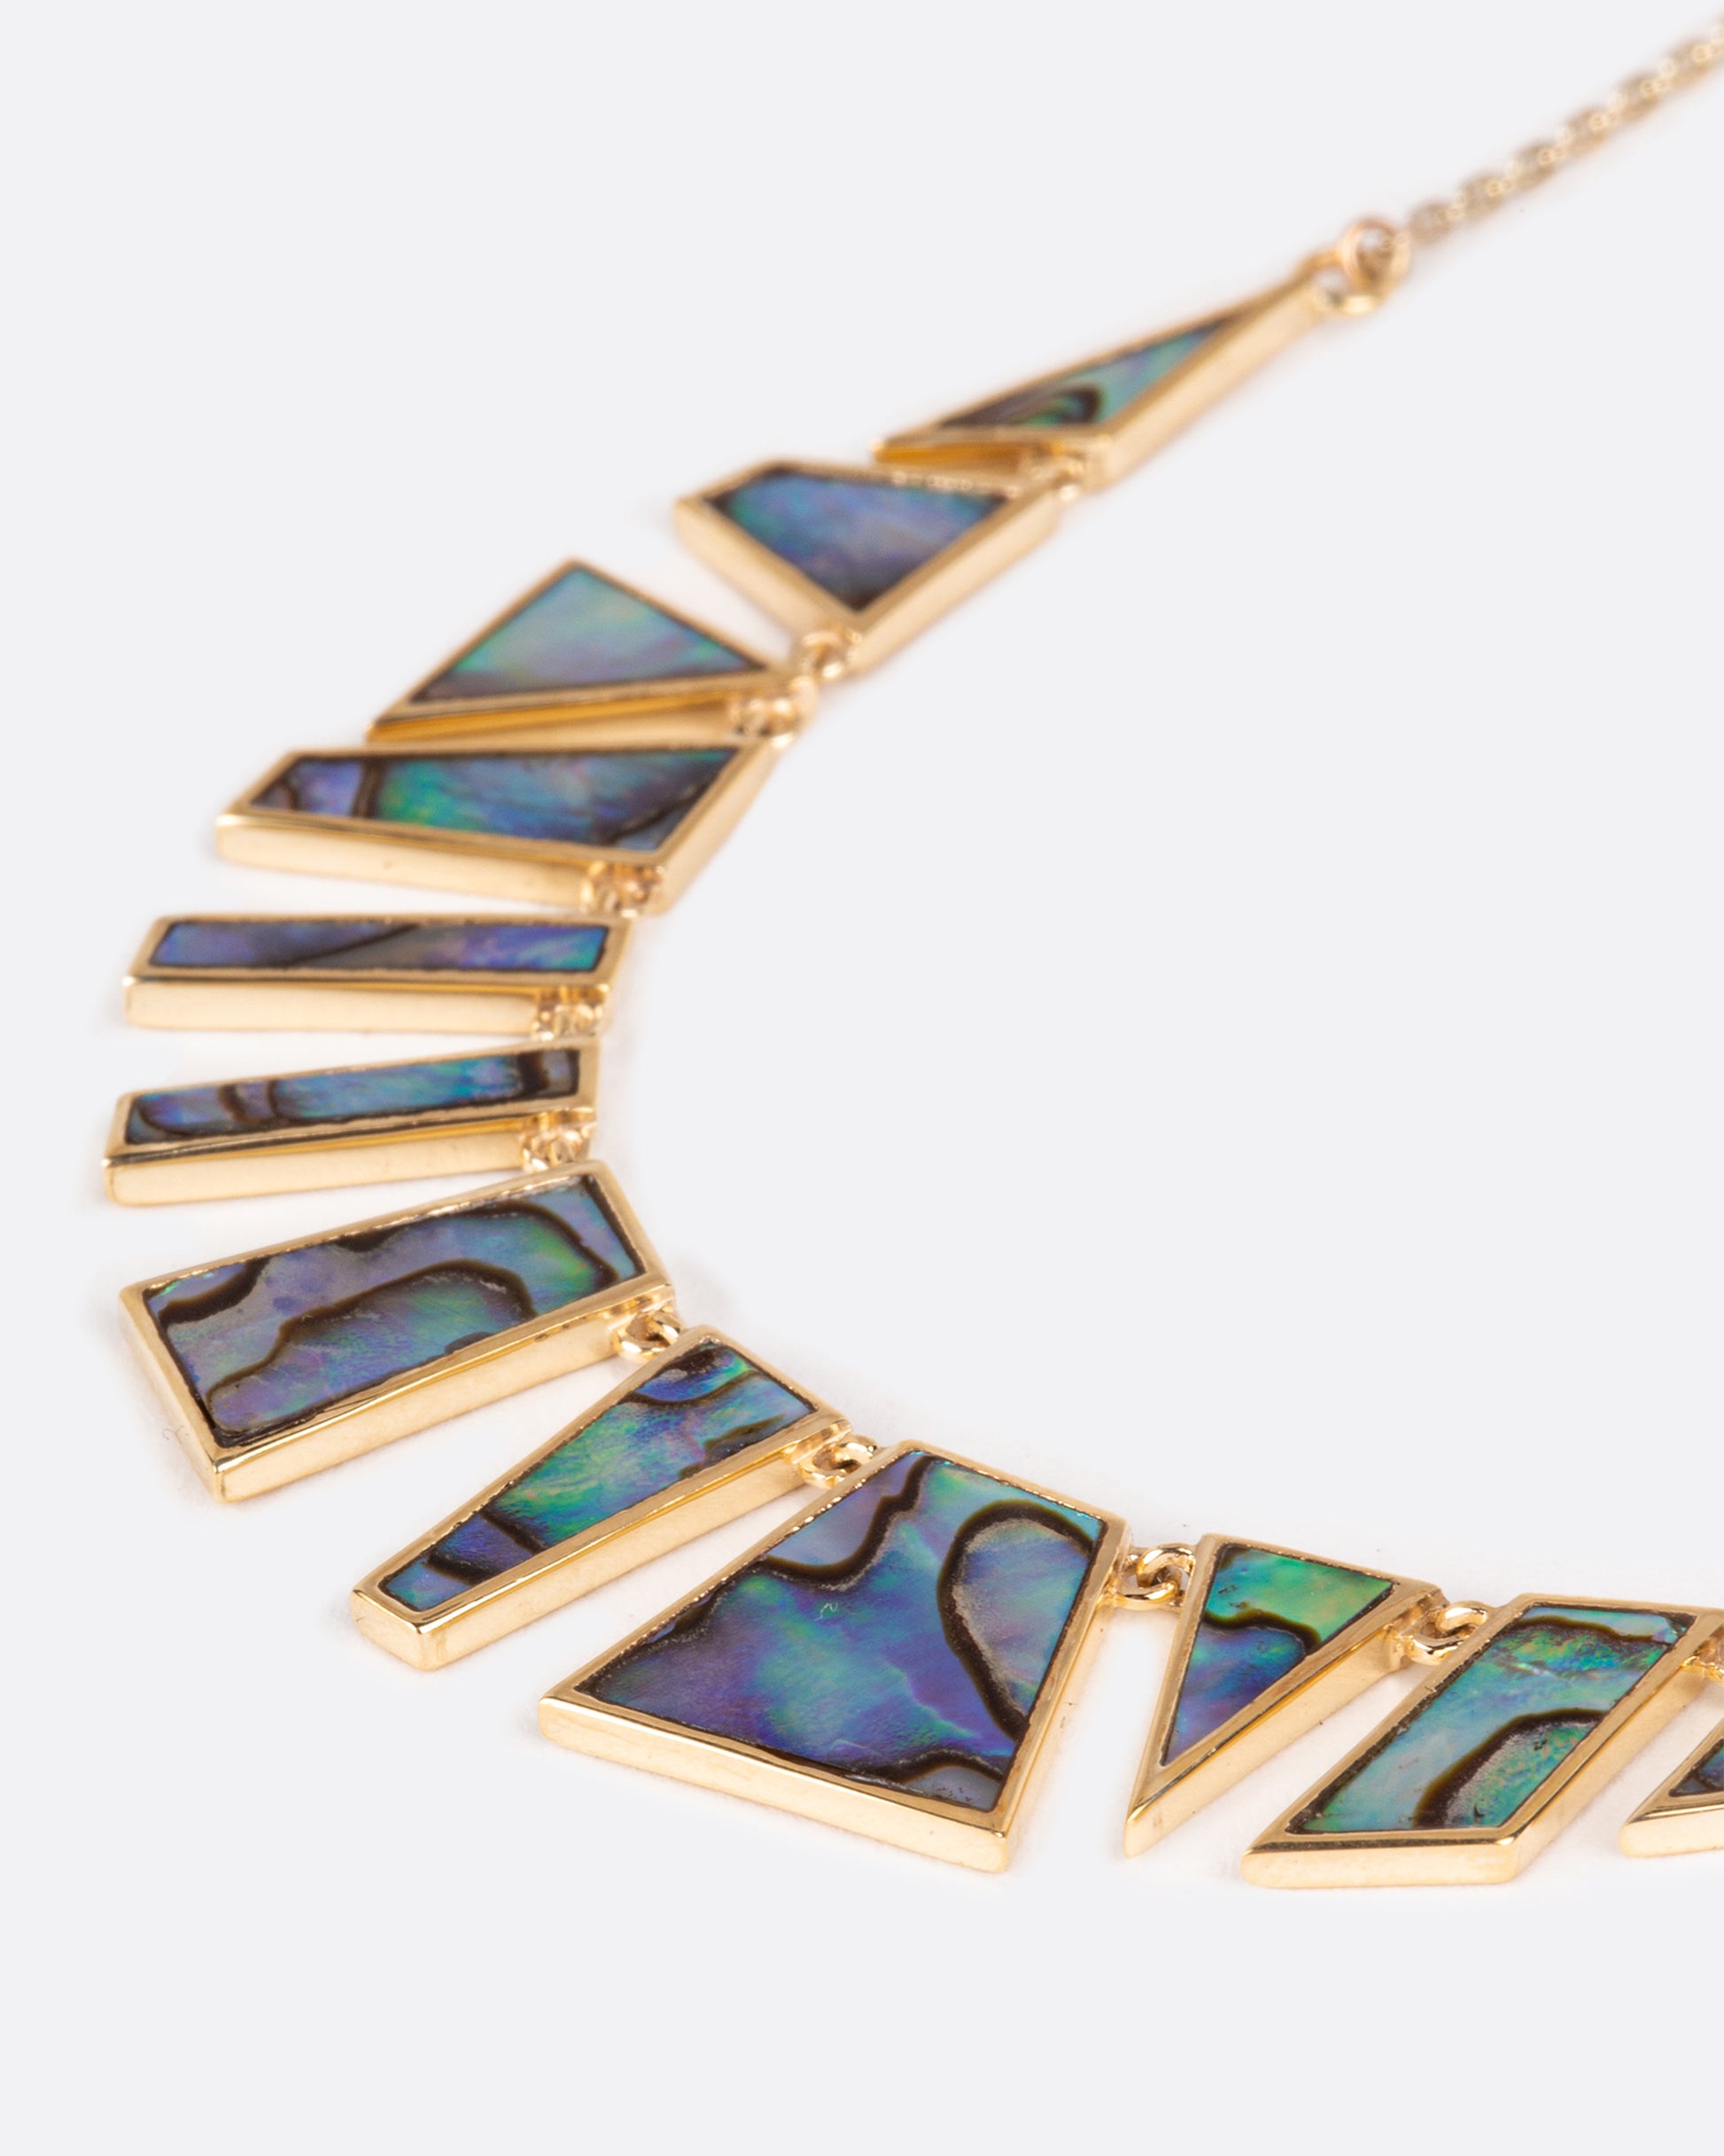 Geometric slices of abalone fit together in this mosaic necklace.